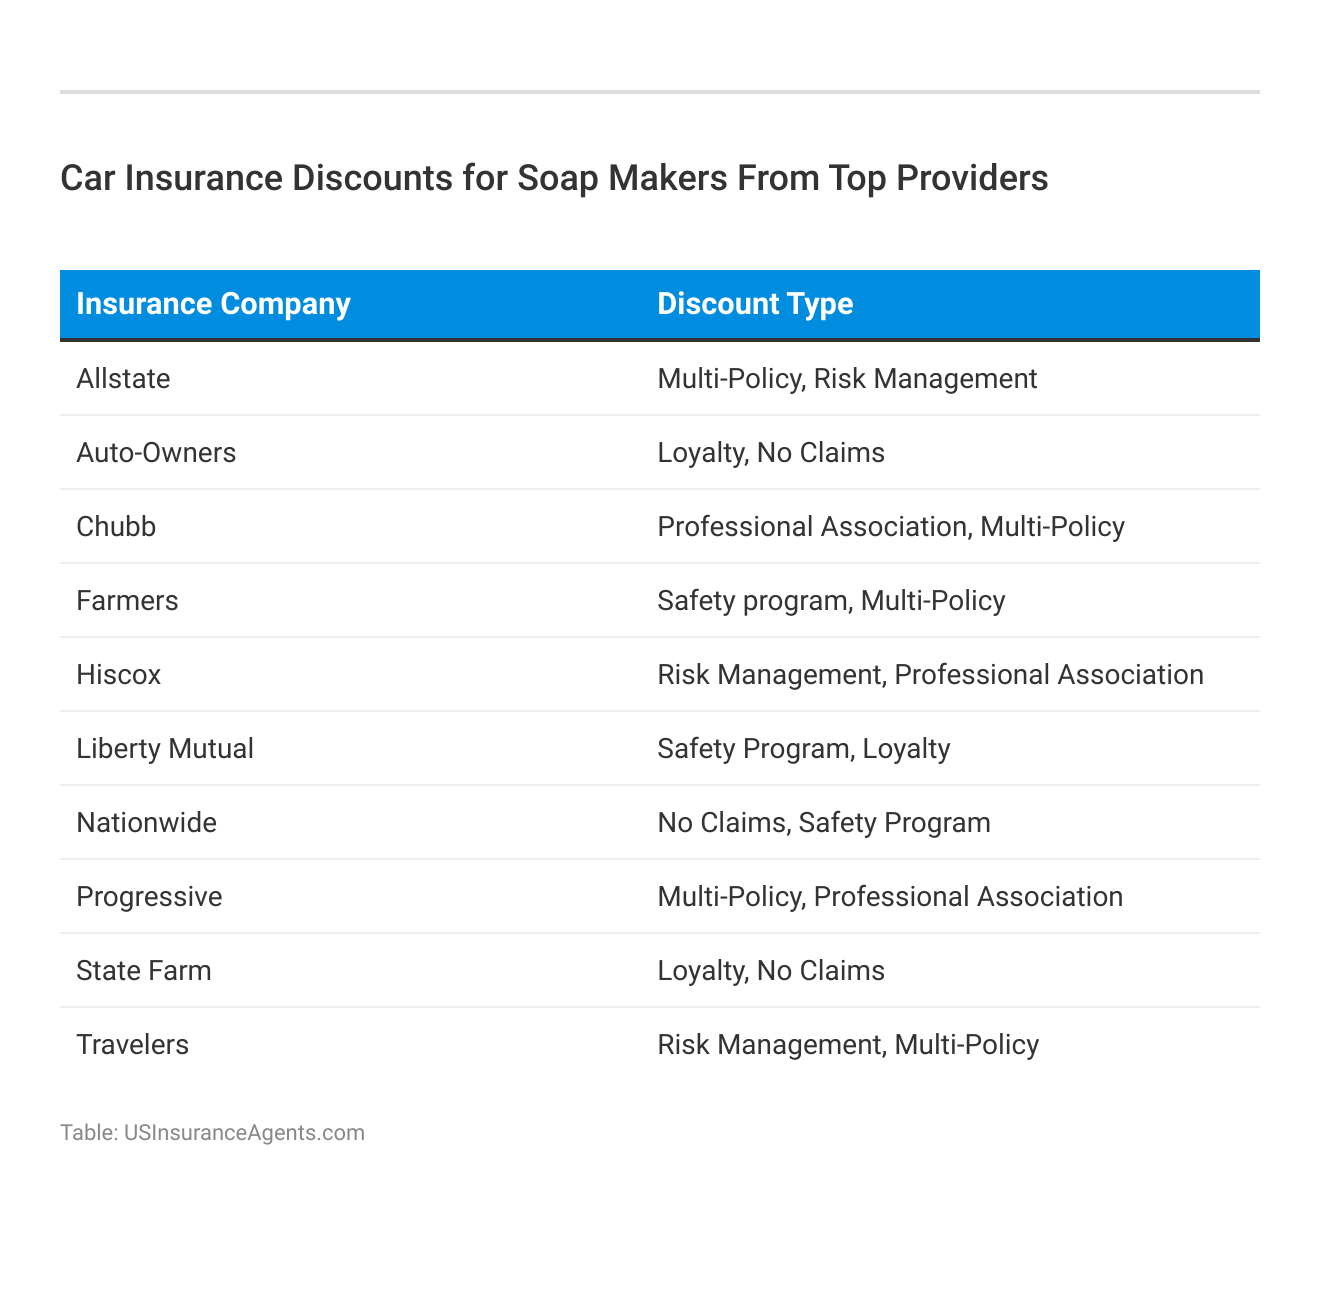 <h3>Car Insurance Discounts for Soap Makers From Top
Providers</h3>